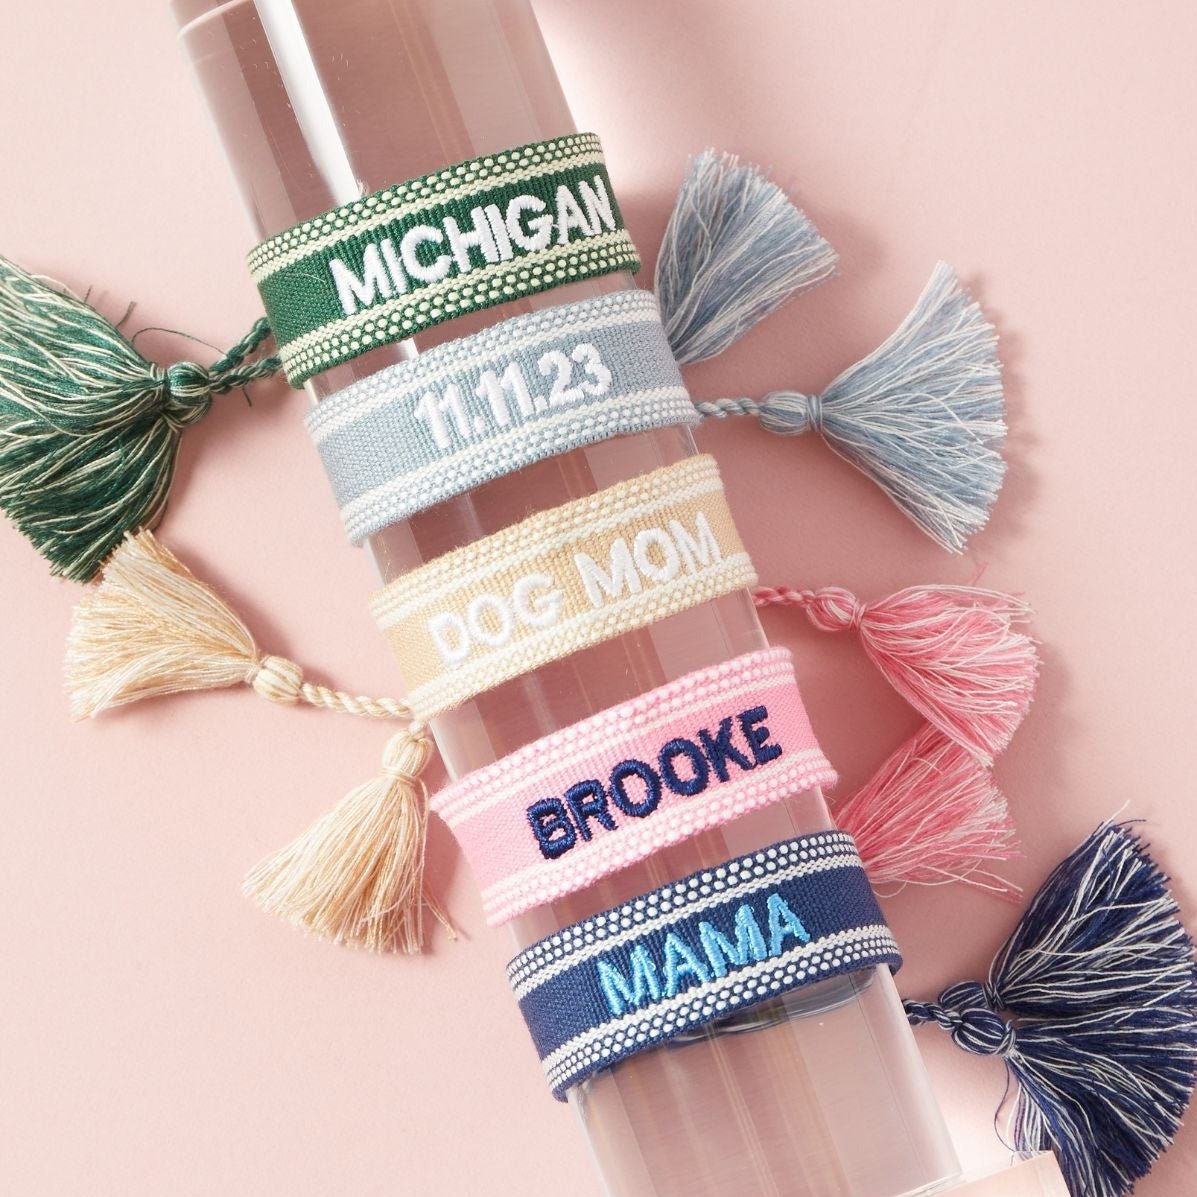 Three colorful bracelets are stacked showing off their custom embroidered text.